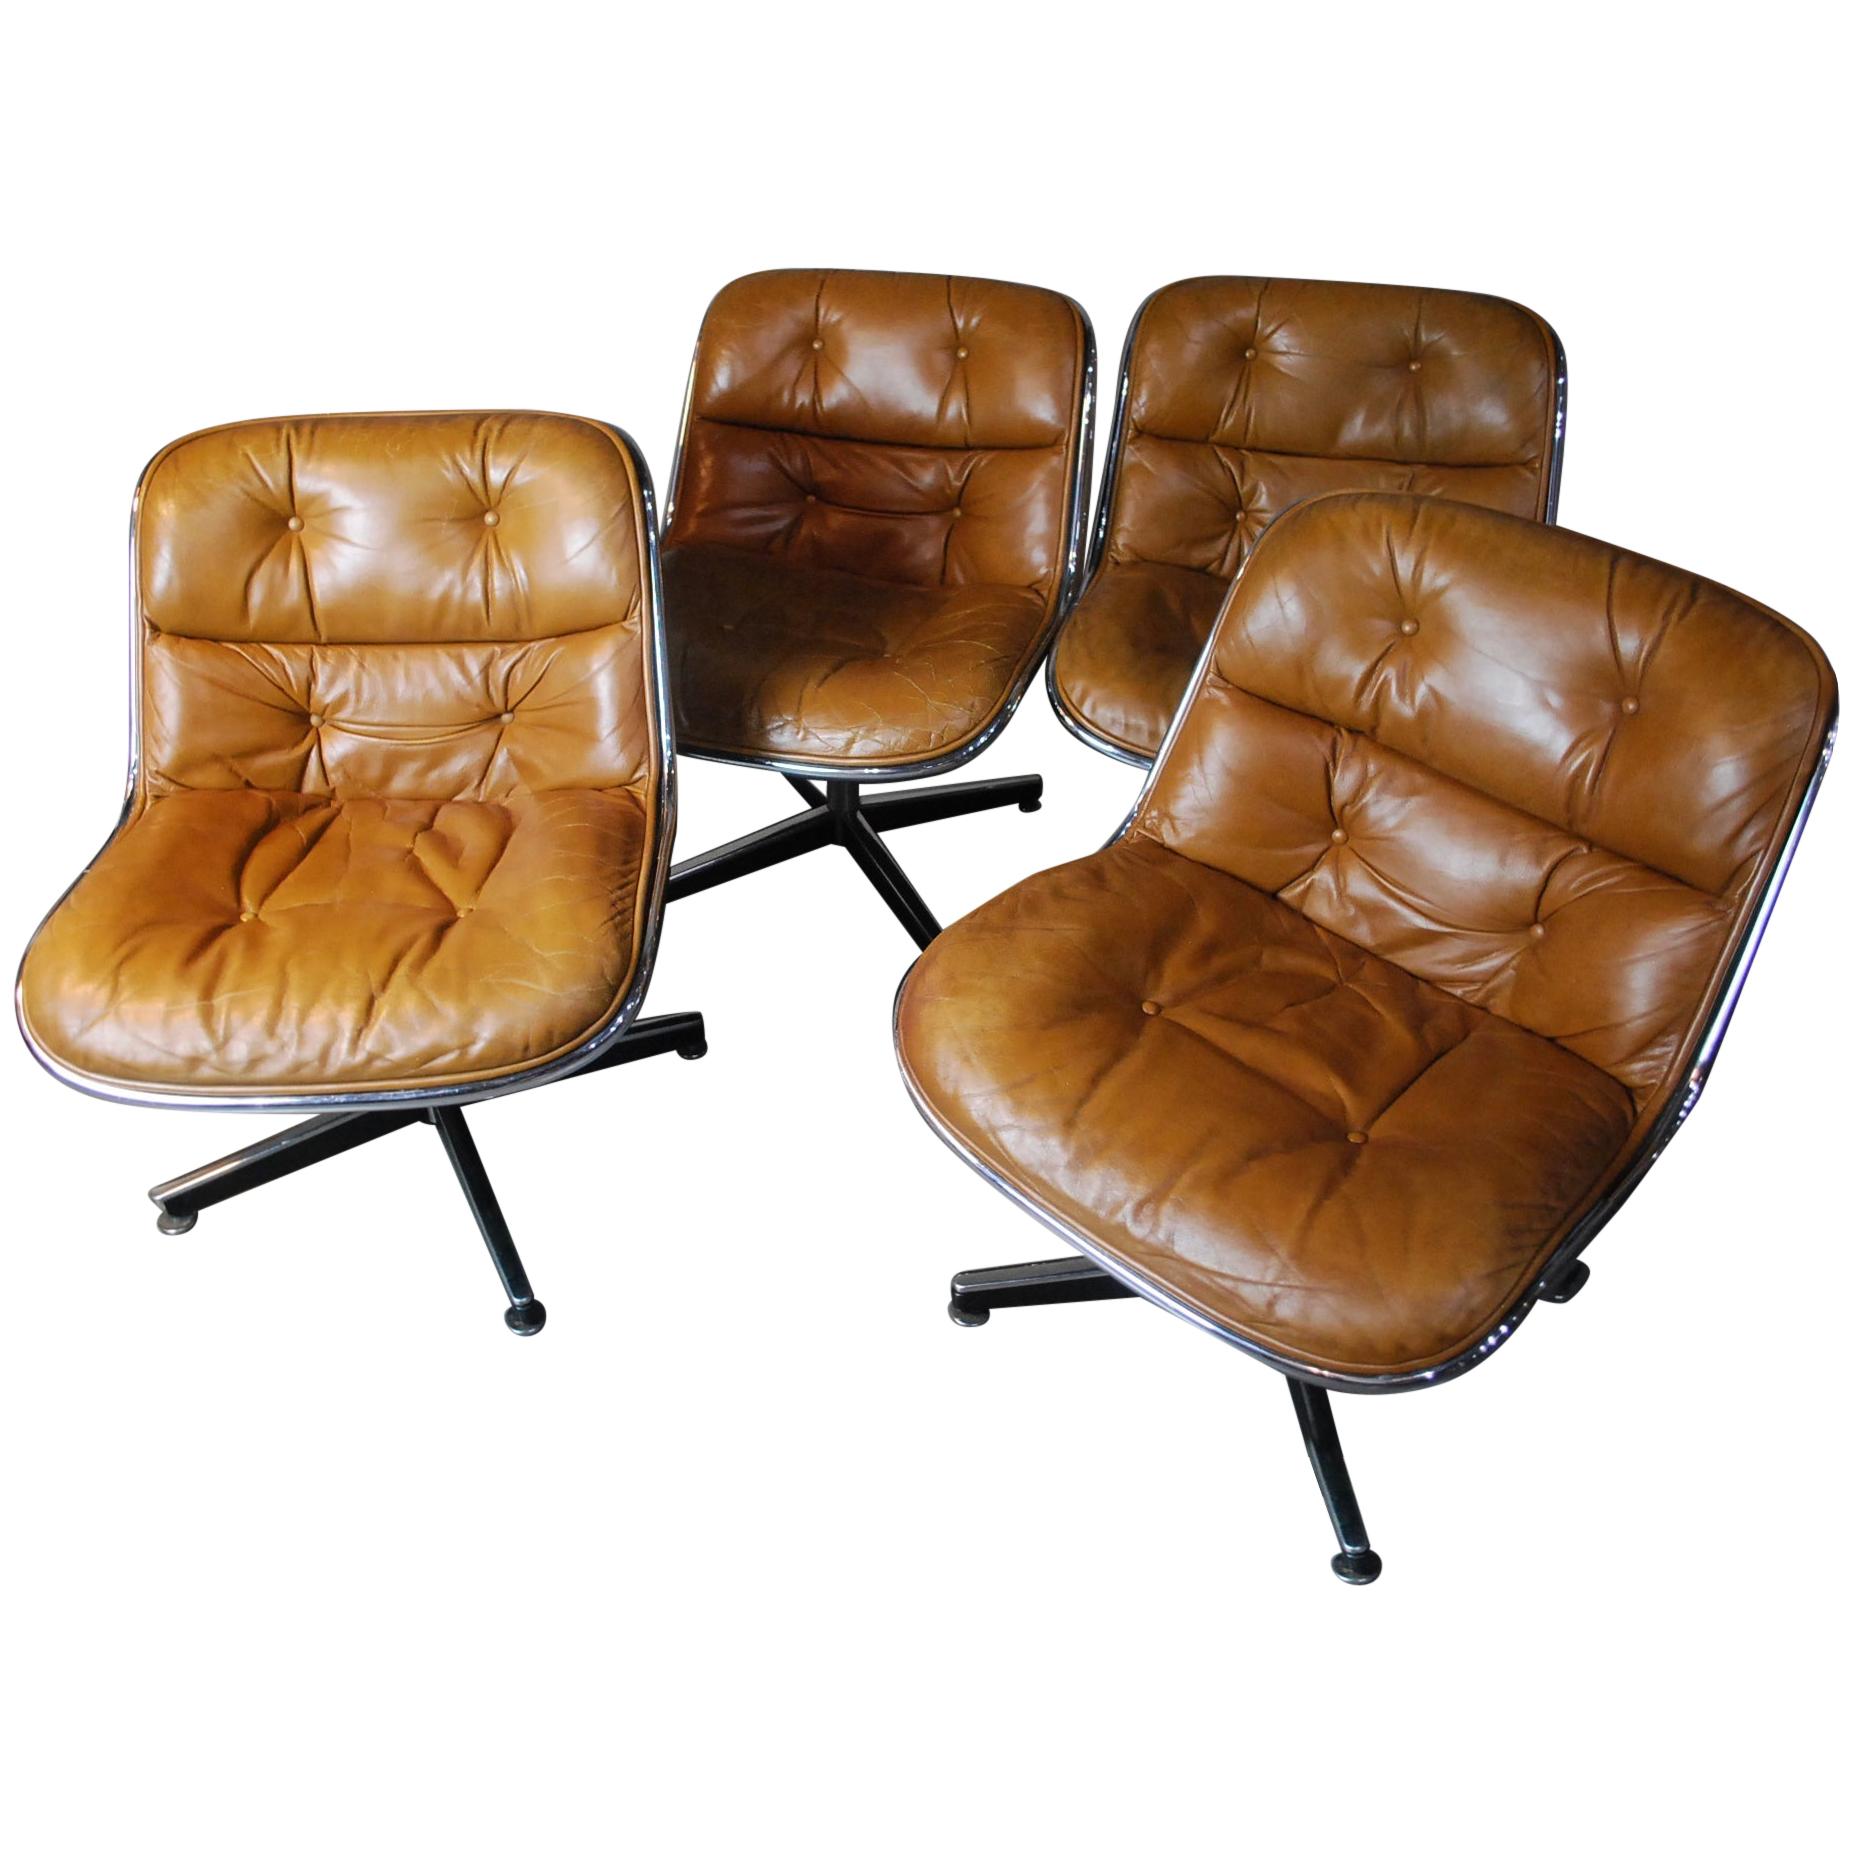 1978 Mid-Century Modern Armless Executive Chairs by Charles Pollock for Knoll